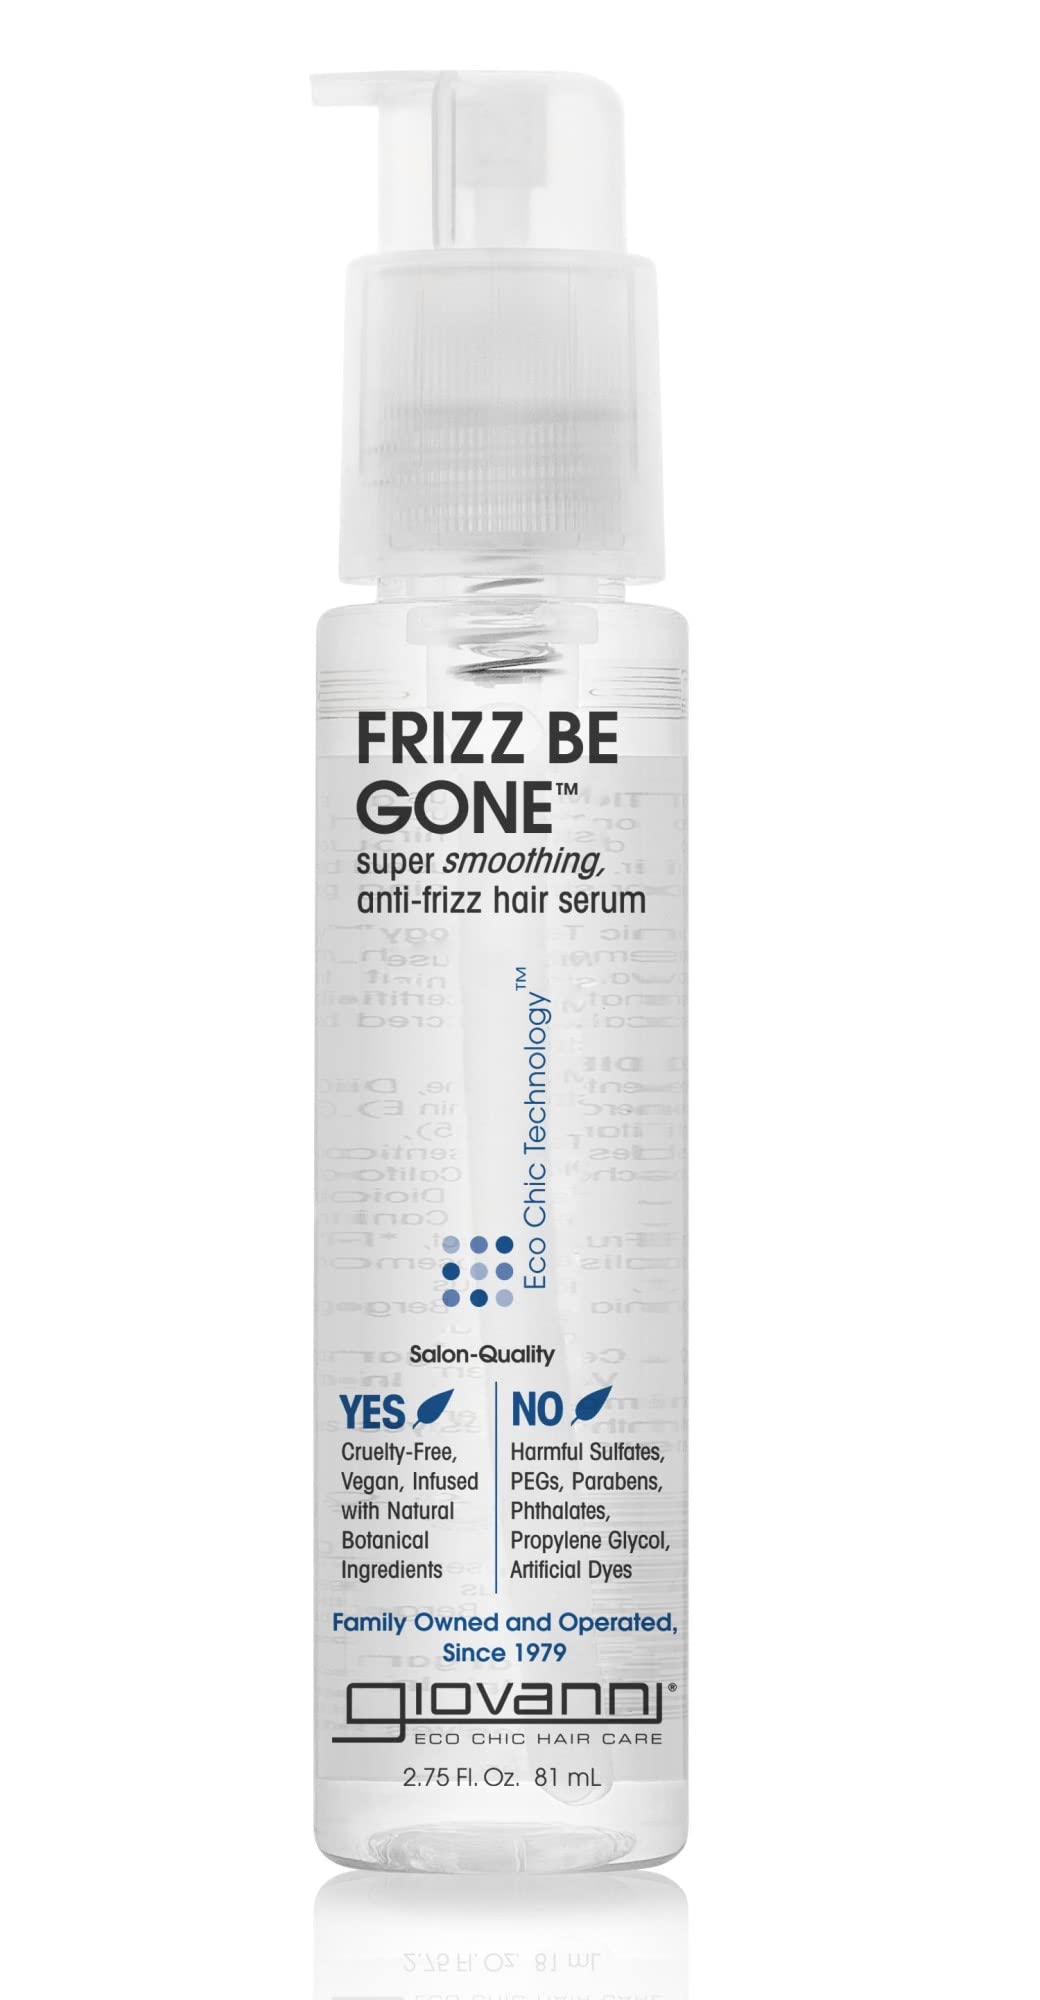 GIOVANNI ECO CHIC Frizz Be Gone - Super Smoothing Anti-Frizz Hair Serum, Adds Shine, Seals in Color, Infused with Natural Botanical Ingredients, Salon Quality, No Parabens - 2.75 oz (3 Pack)